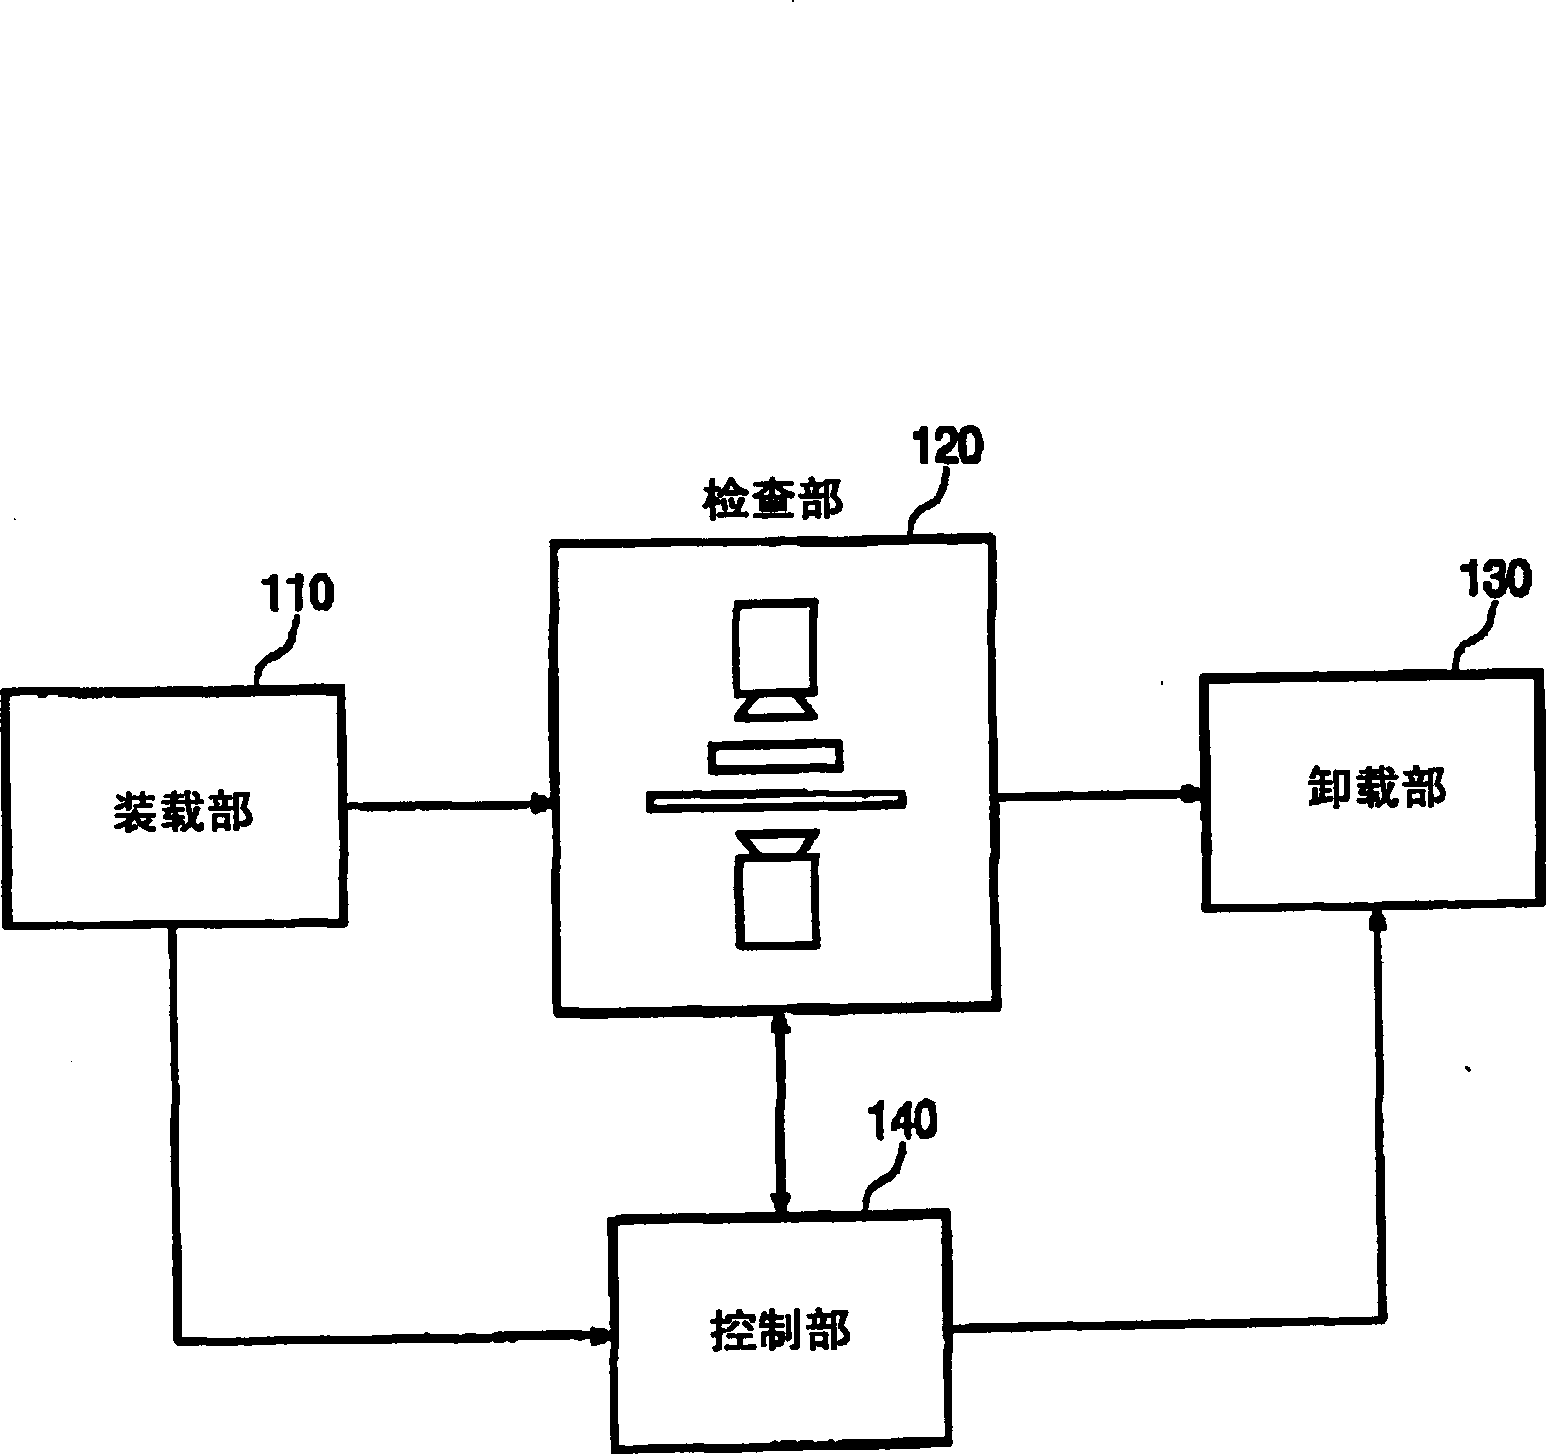 Automatic optical detection device and method